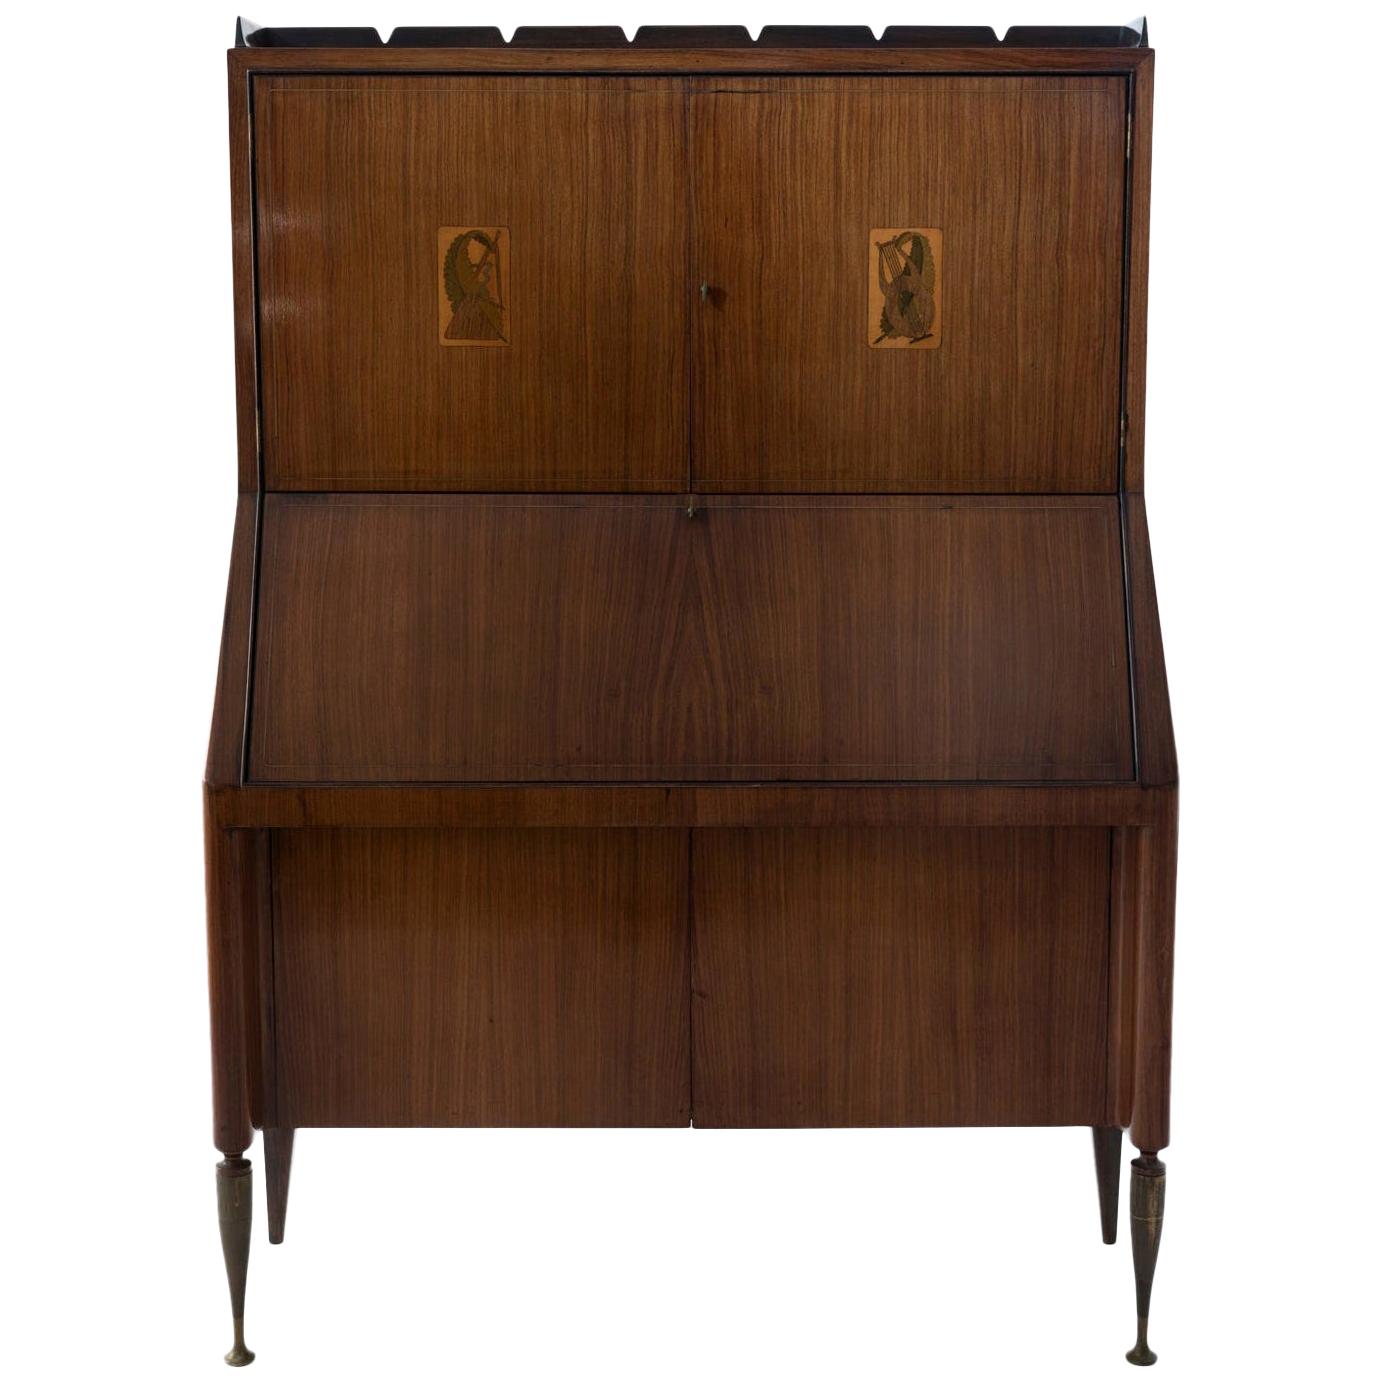 1950 Cabinet/Secrétaire by Giovanni Gariboldi for Colli, Bubinga and Inlay Work